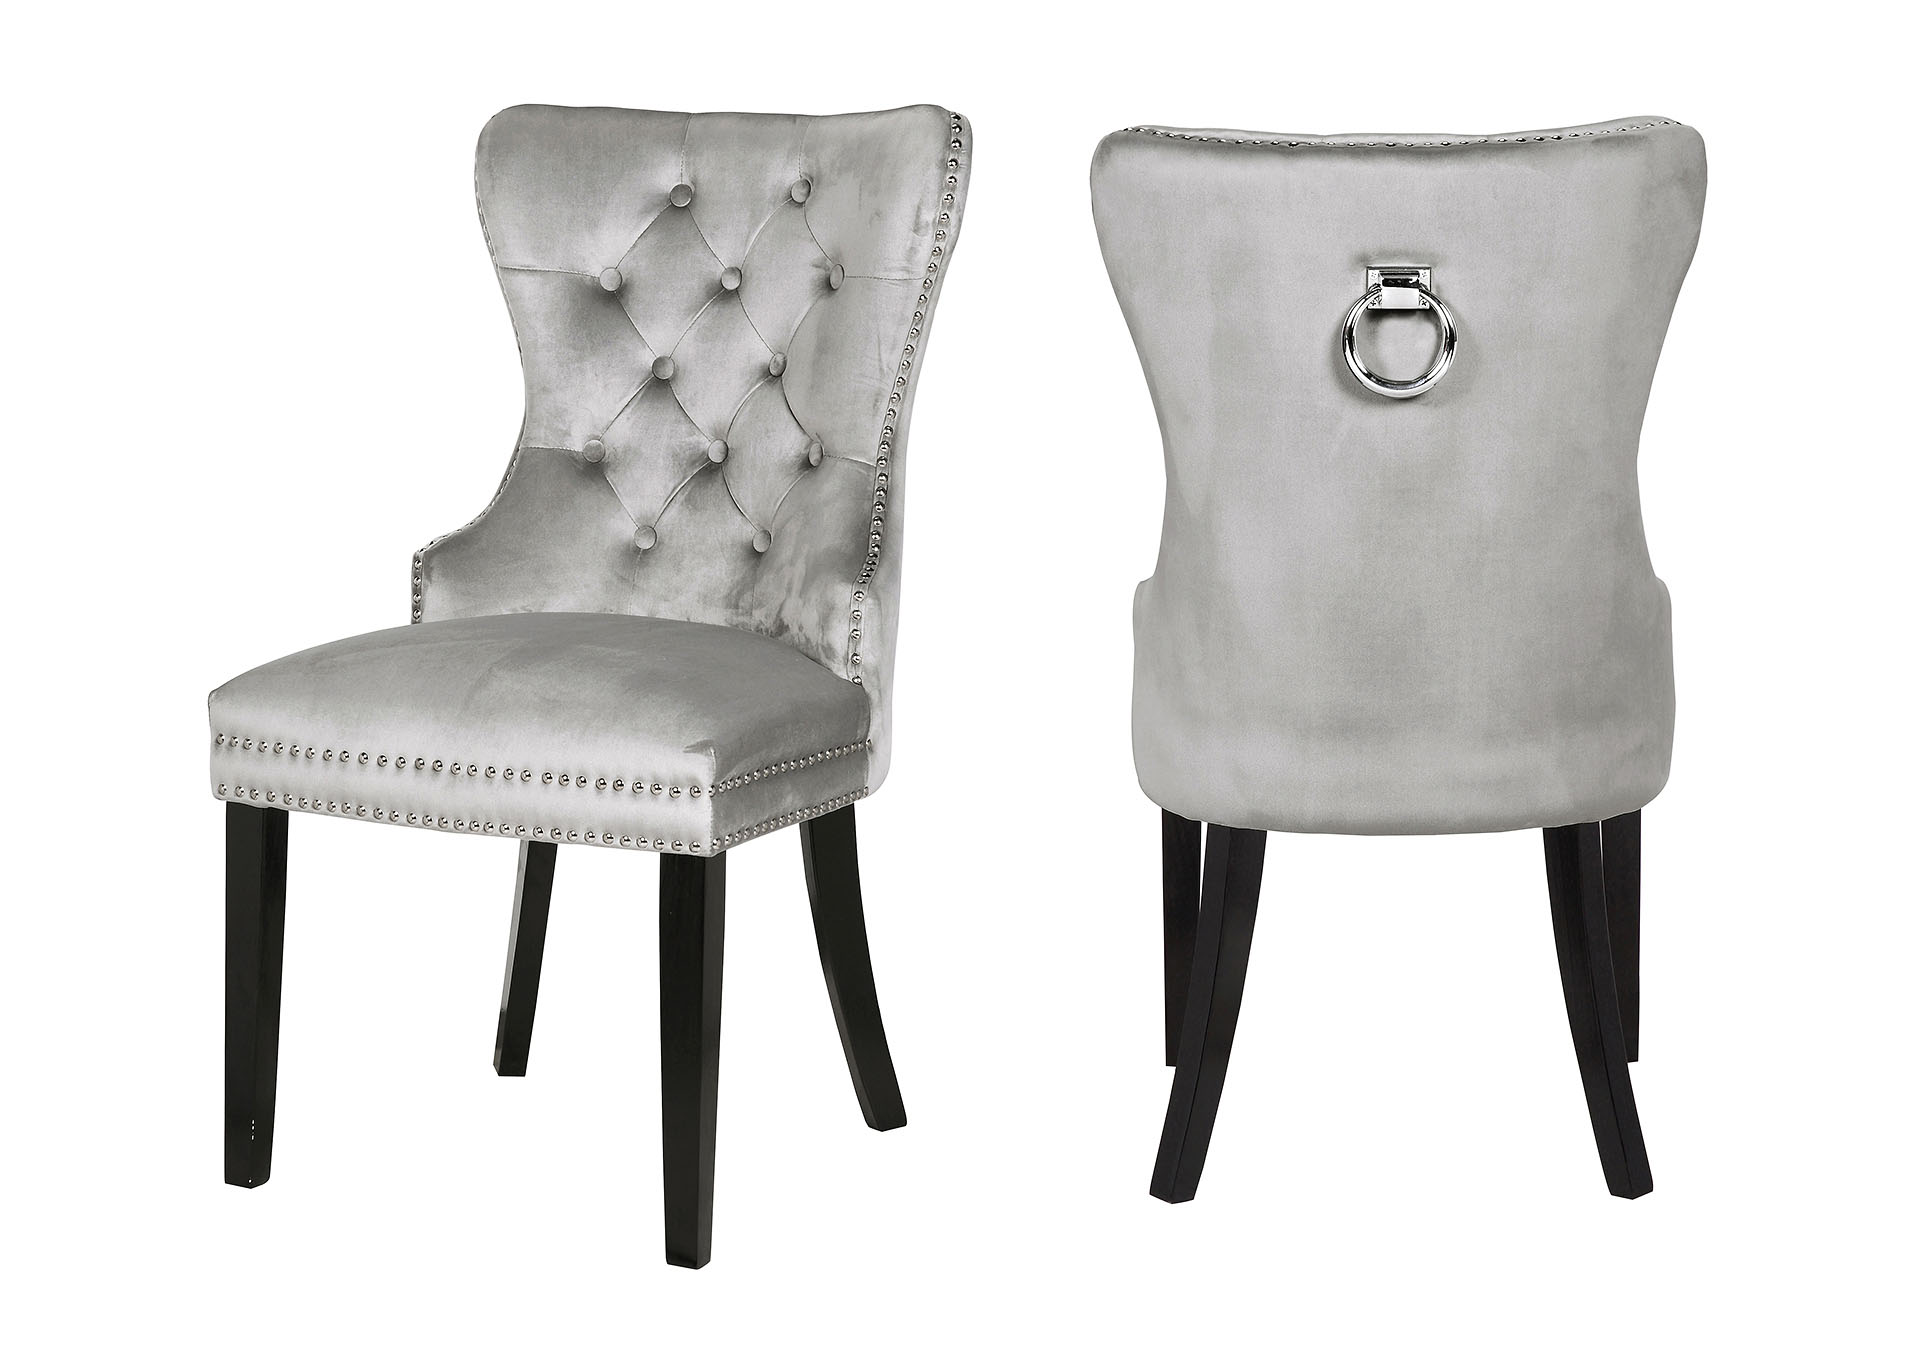 Erica Light Gray Accent chairs / dining chairs,Galaxy Home Furniture